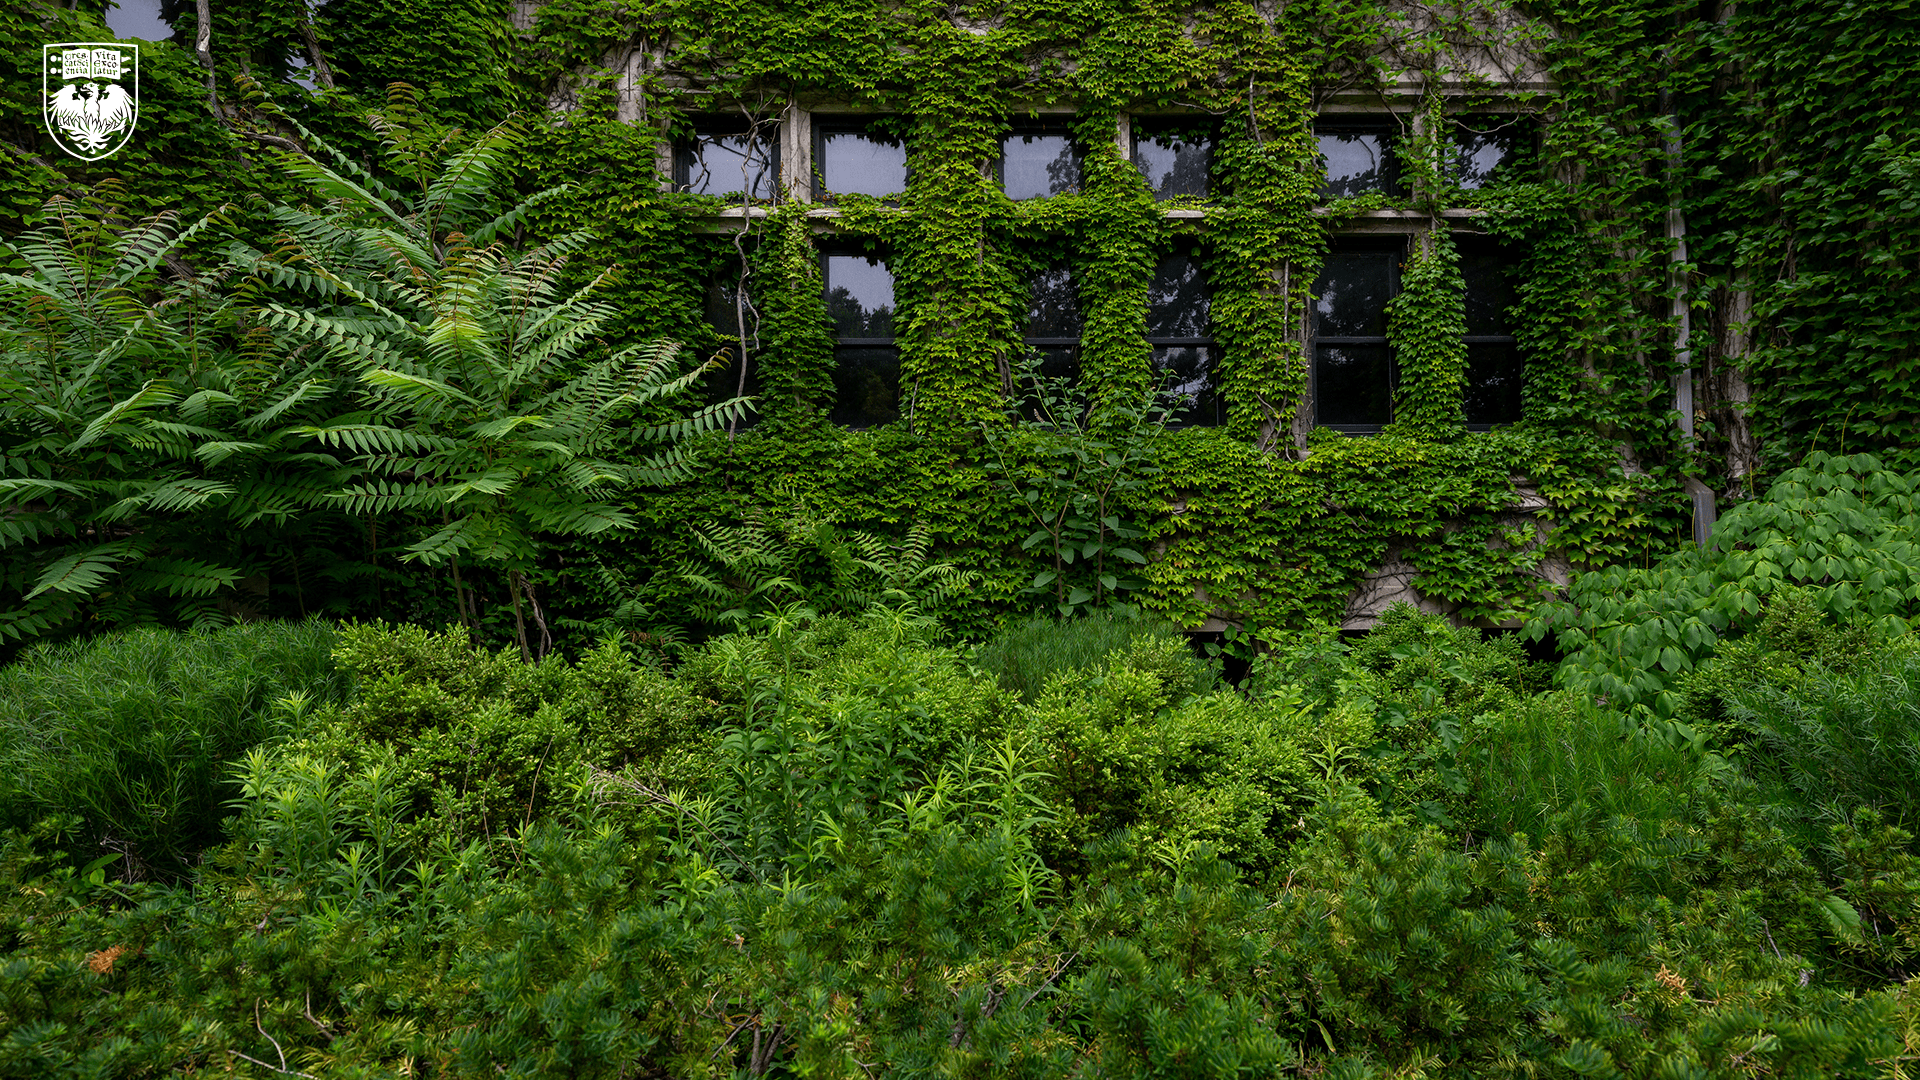 Greenery and Ivy Wide Shot